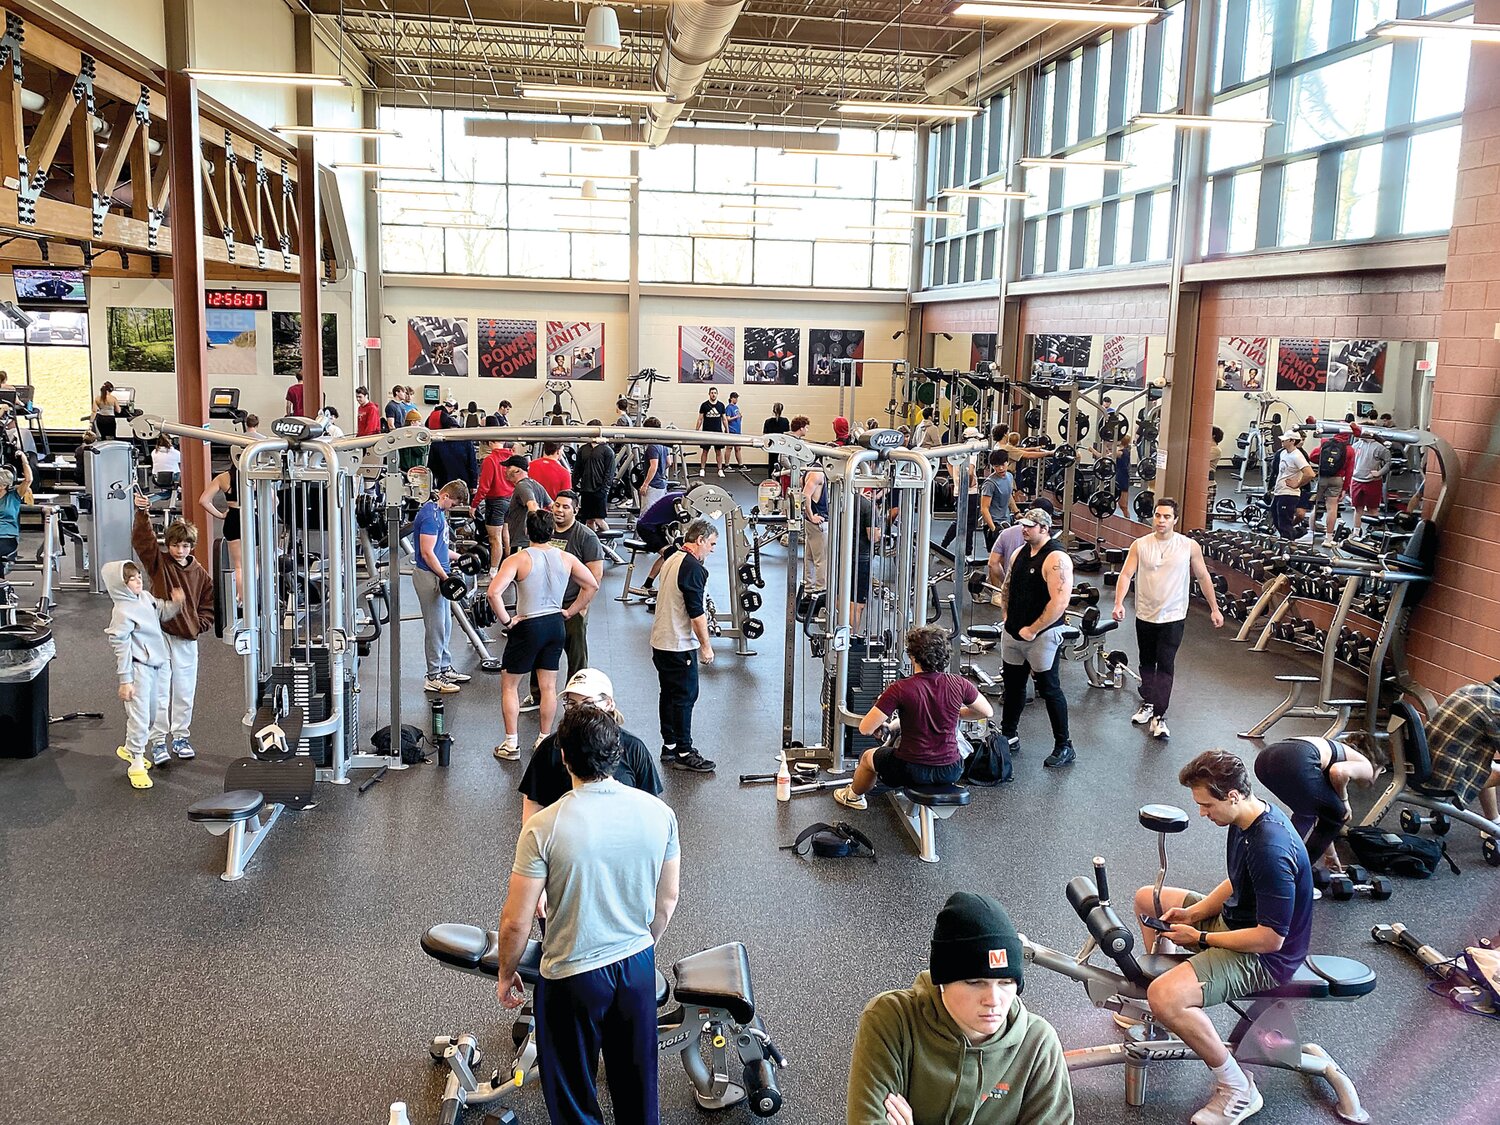 The Wellness Center at the Doylestown Township site of the YMCA of Bucks and Hunterdon Counties attracts exercise enthusiasts.